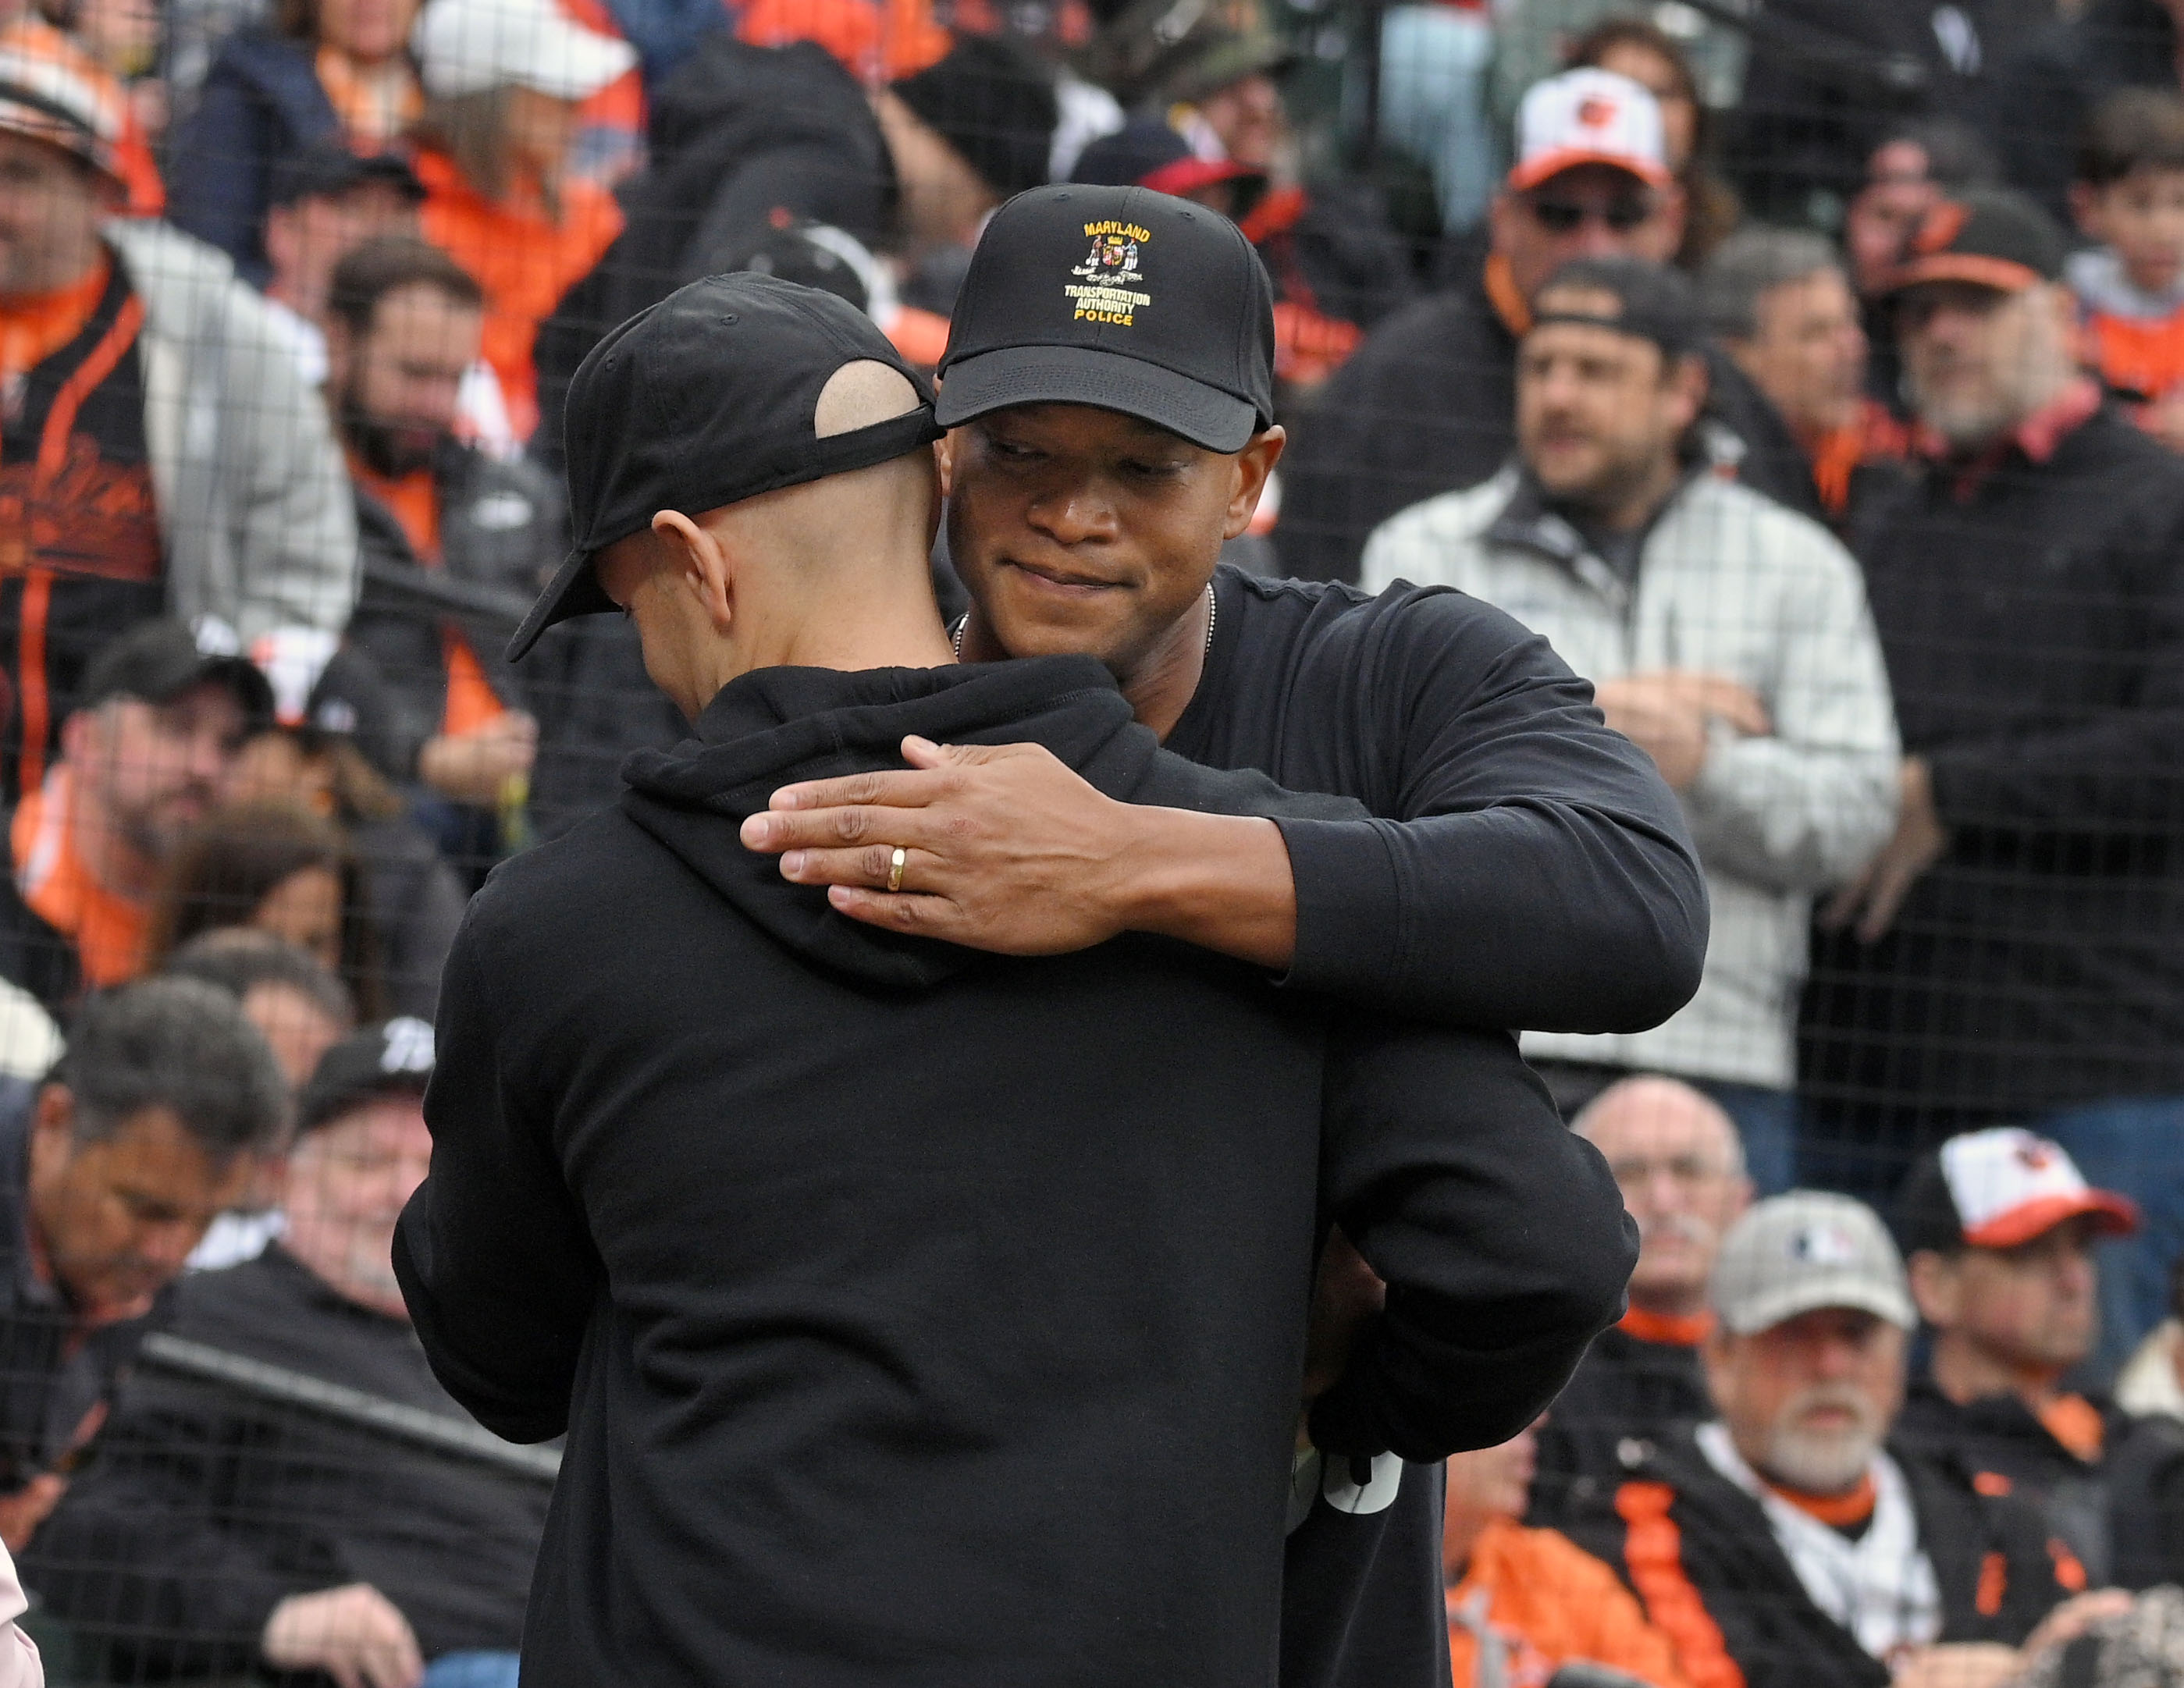 Mar 28, 2024: Gov. Wes Moore hugs one of the MTA police officers who were recognized for their response to the Key Bridge incident that saved lives during Orioles 2024 season opening day at Oriole Park at Camden Yards. (Kenneth K. Lam/Staff)